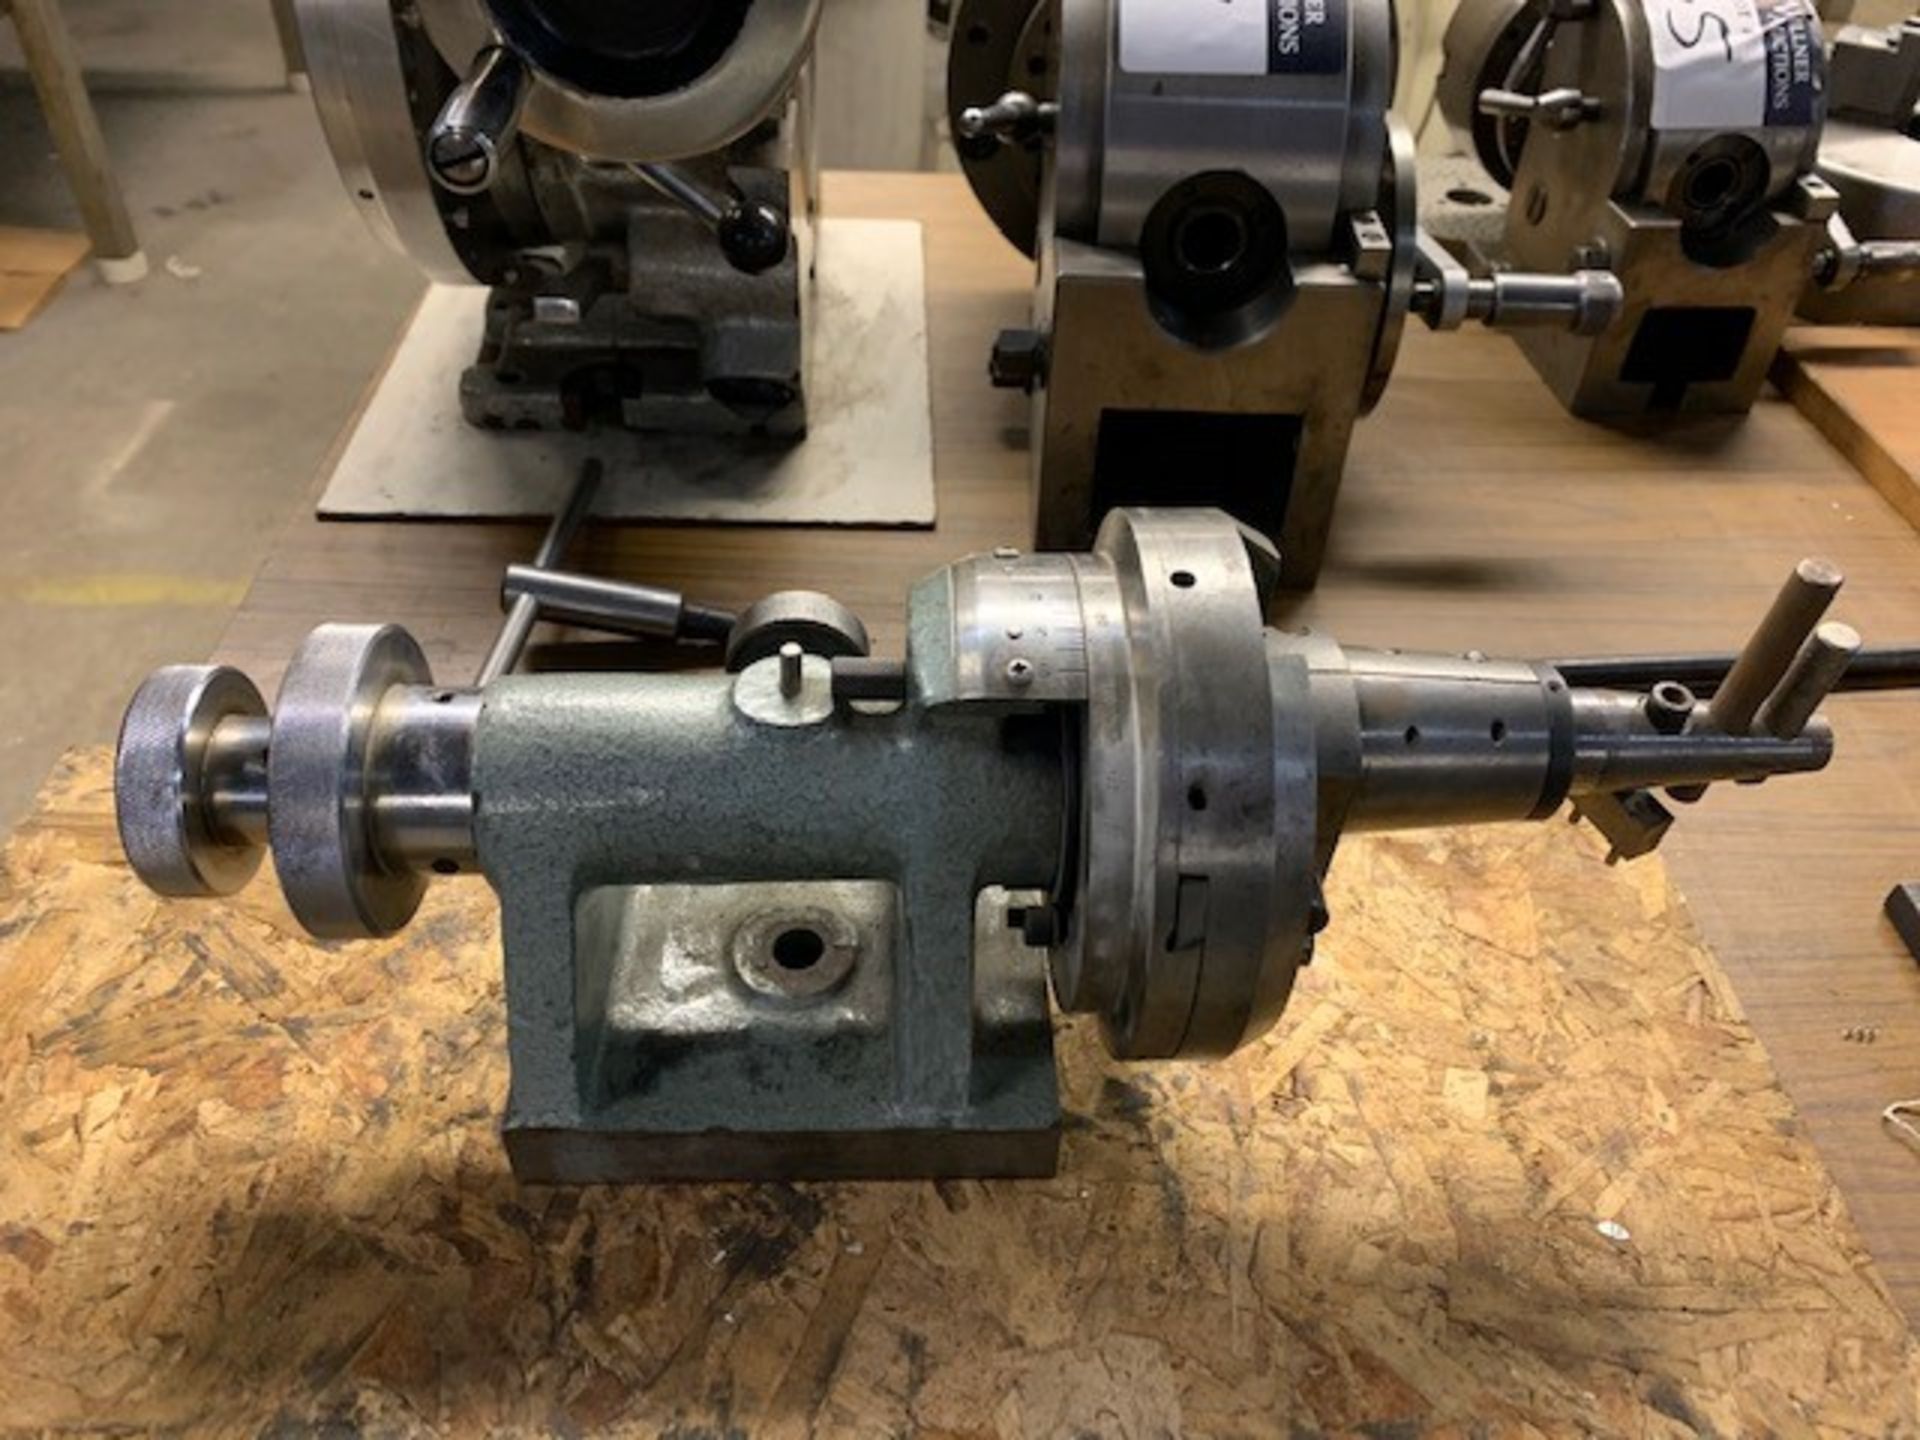 Milling Machine Attachment - Image 2 of 3